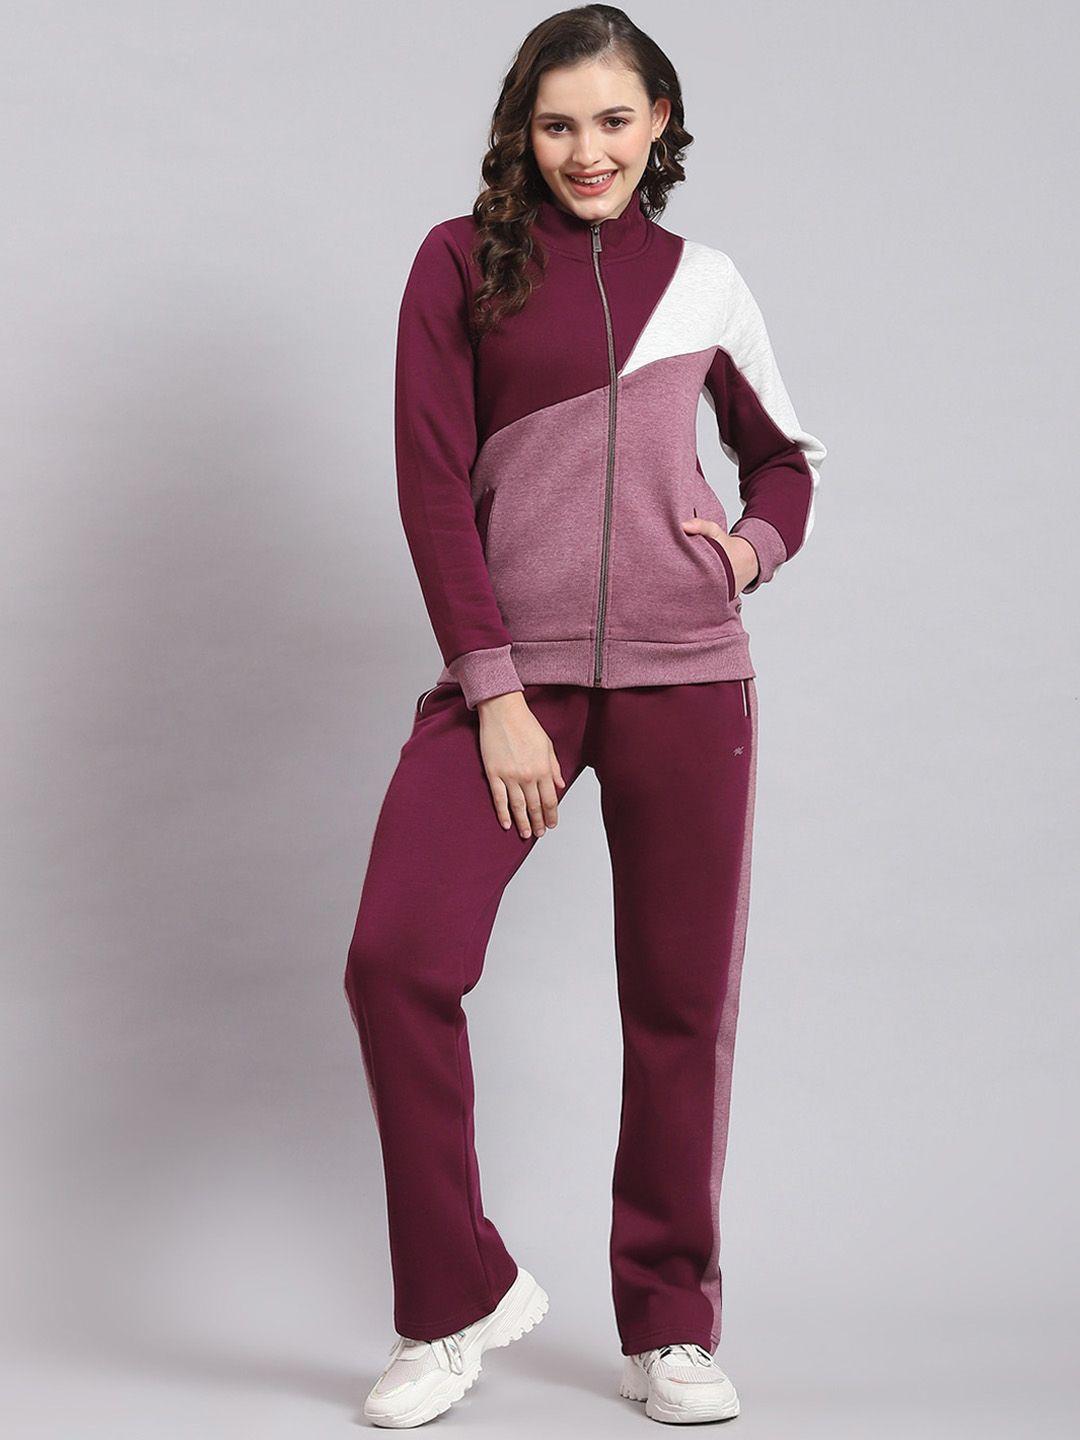 monte carlo colourblocked mid-rise sweatshirt with track pants